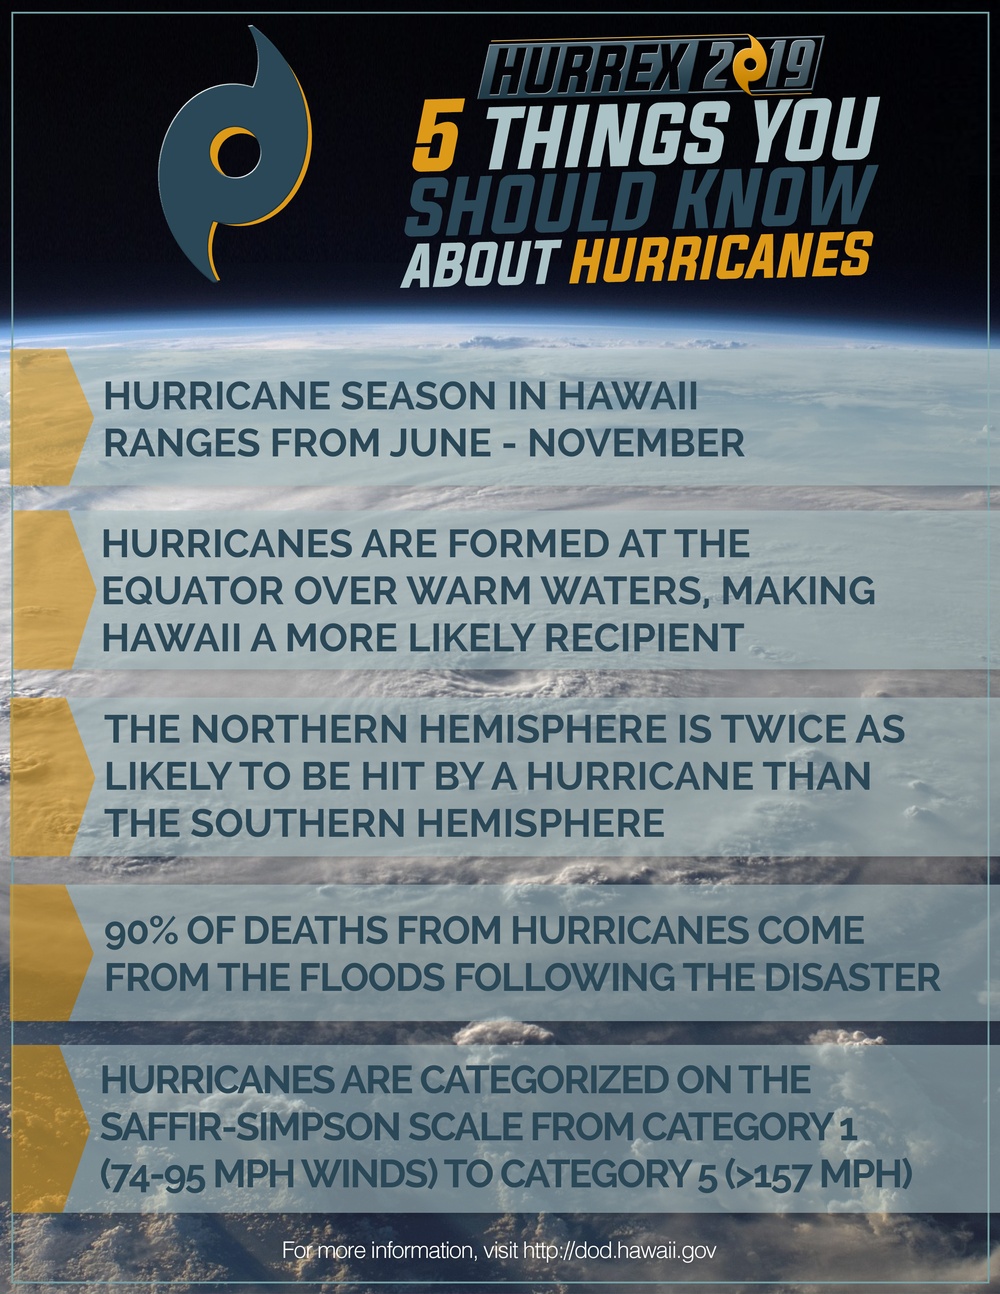 HURREX 5 Things You Should Know About Hurricanes